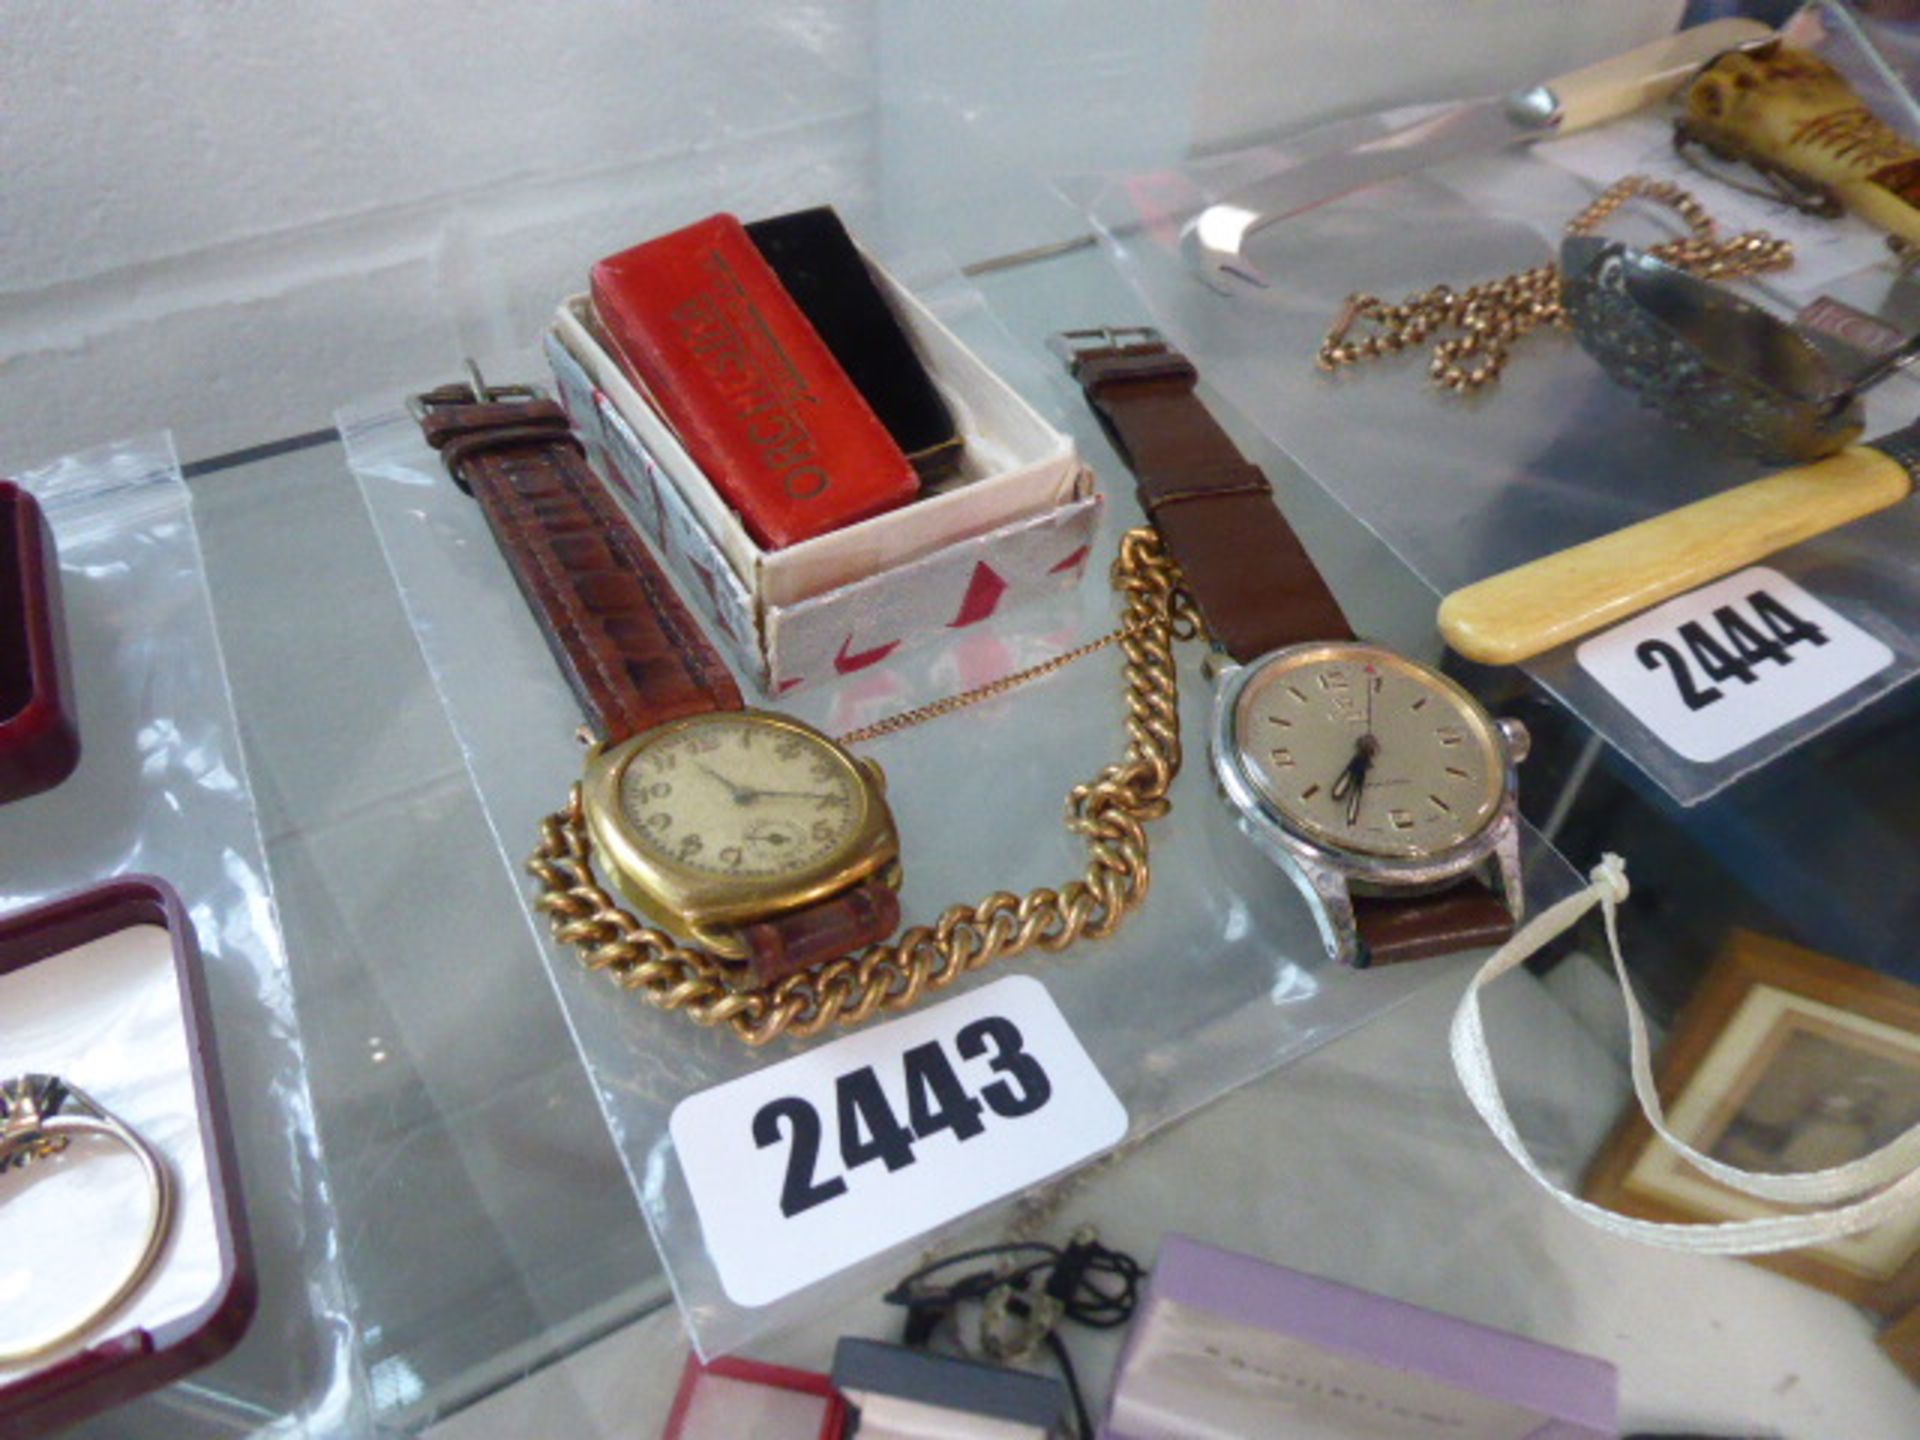 Two vintage gents watches together with a chain and other items